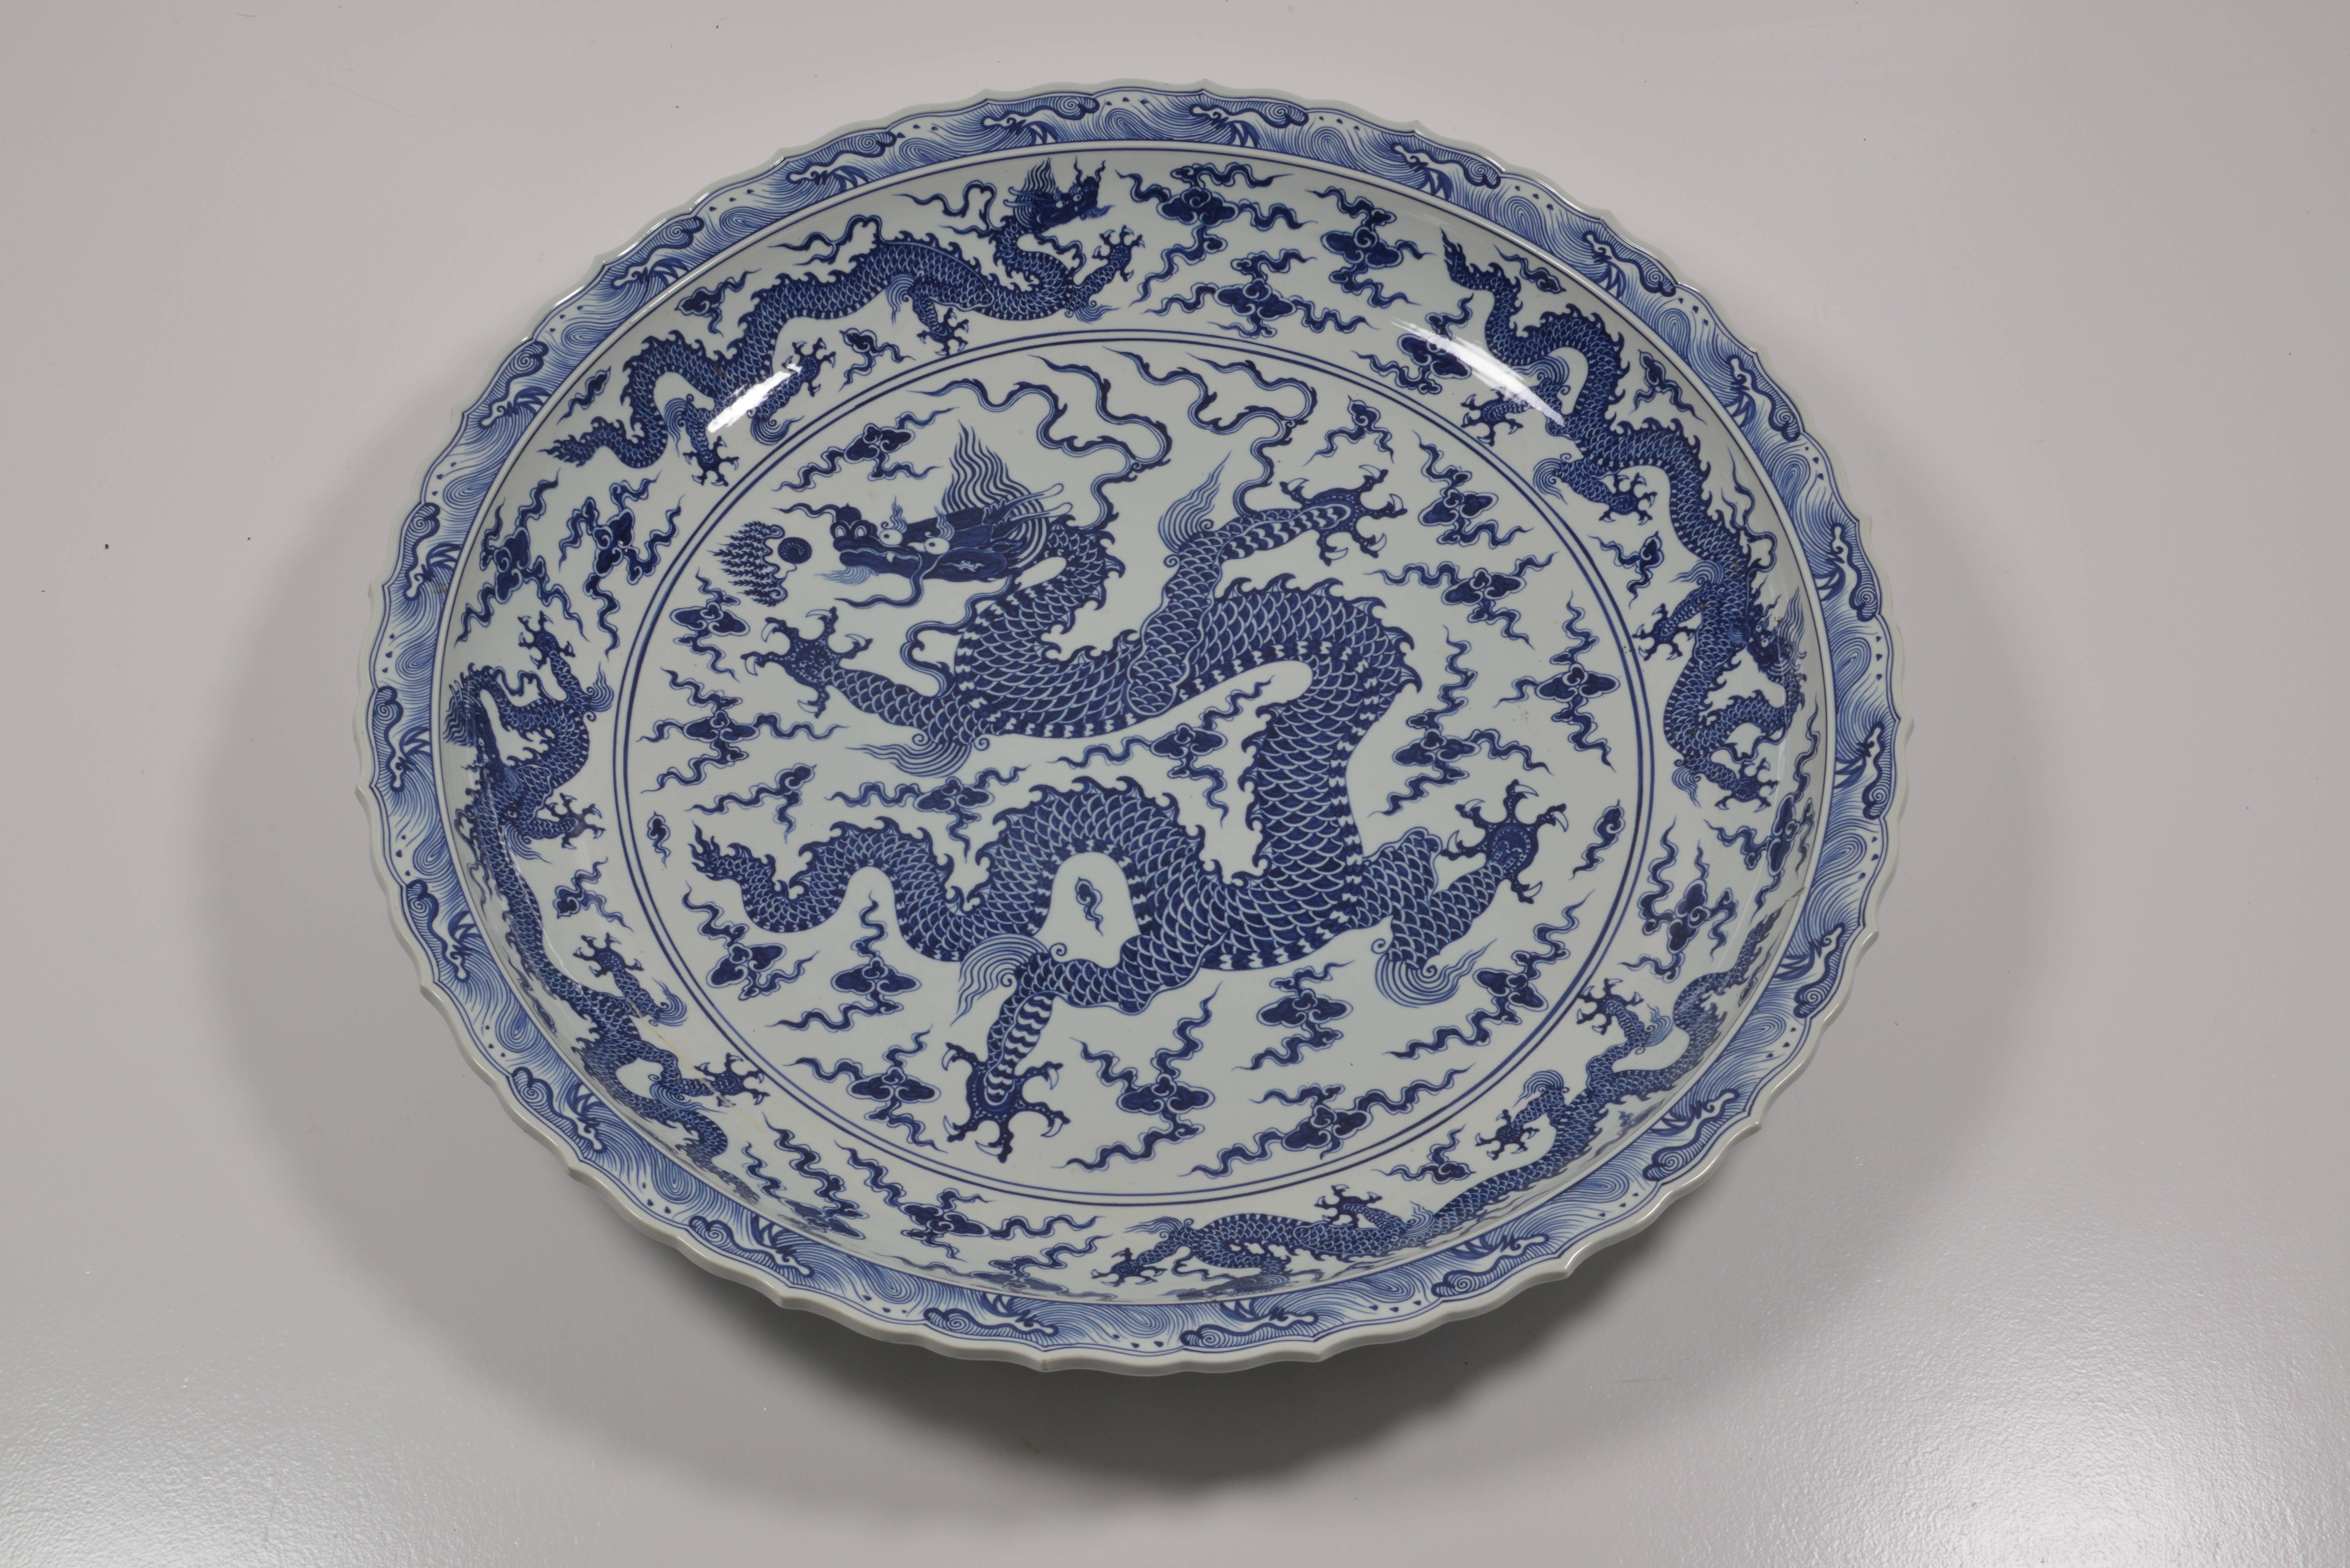 Gigantic Chinese Porcelain Plate 1